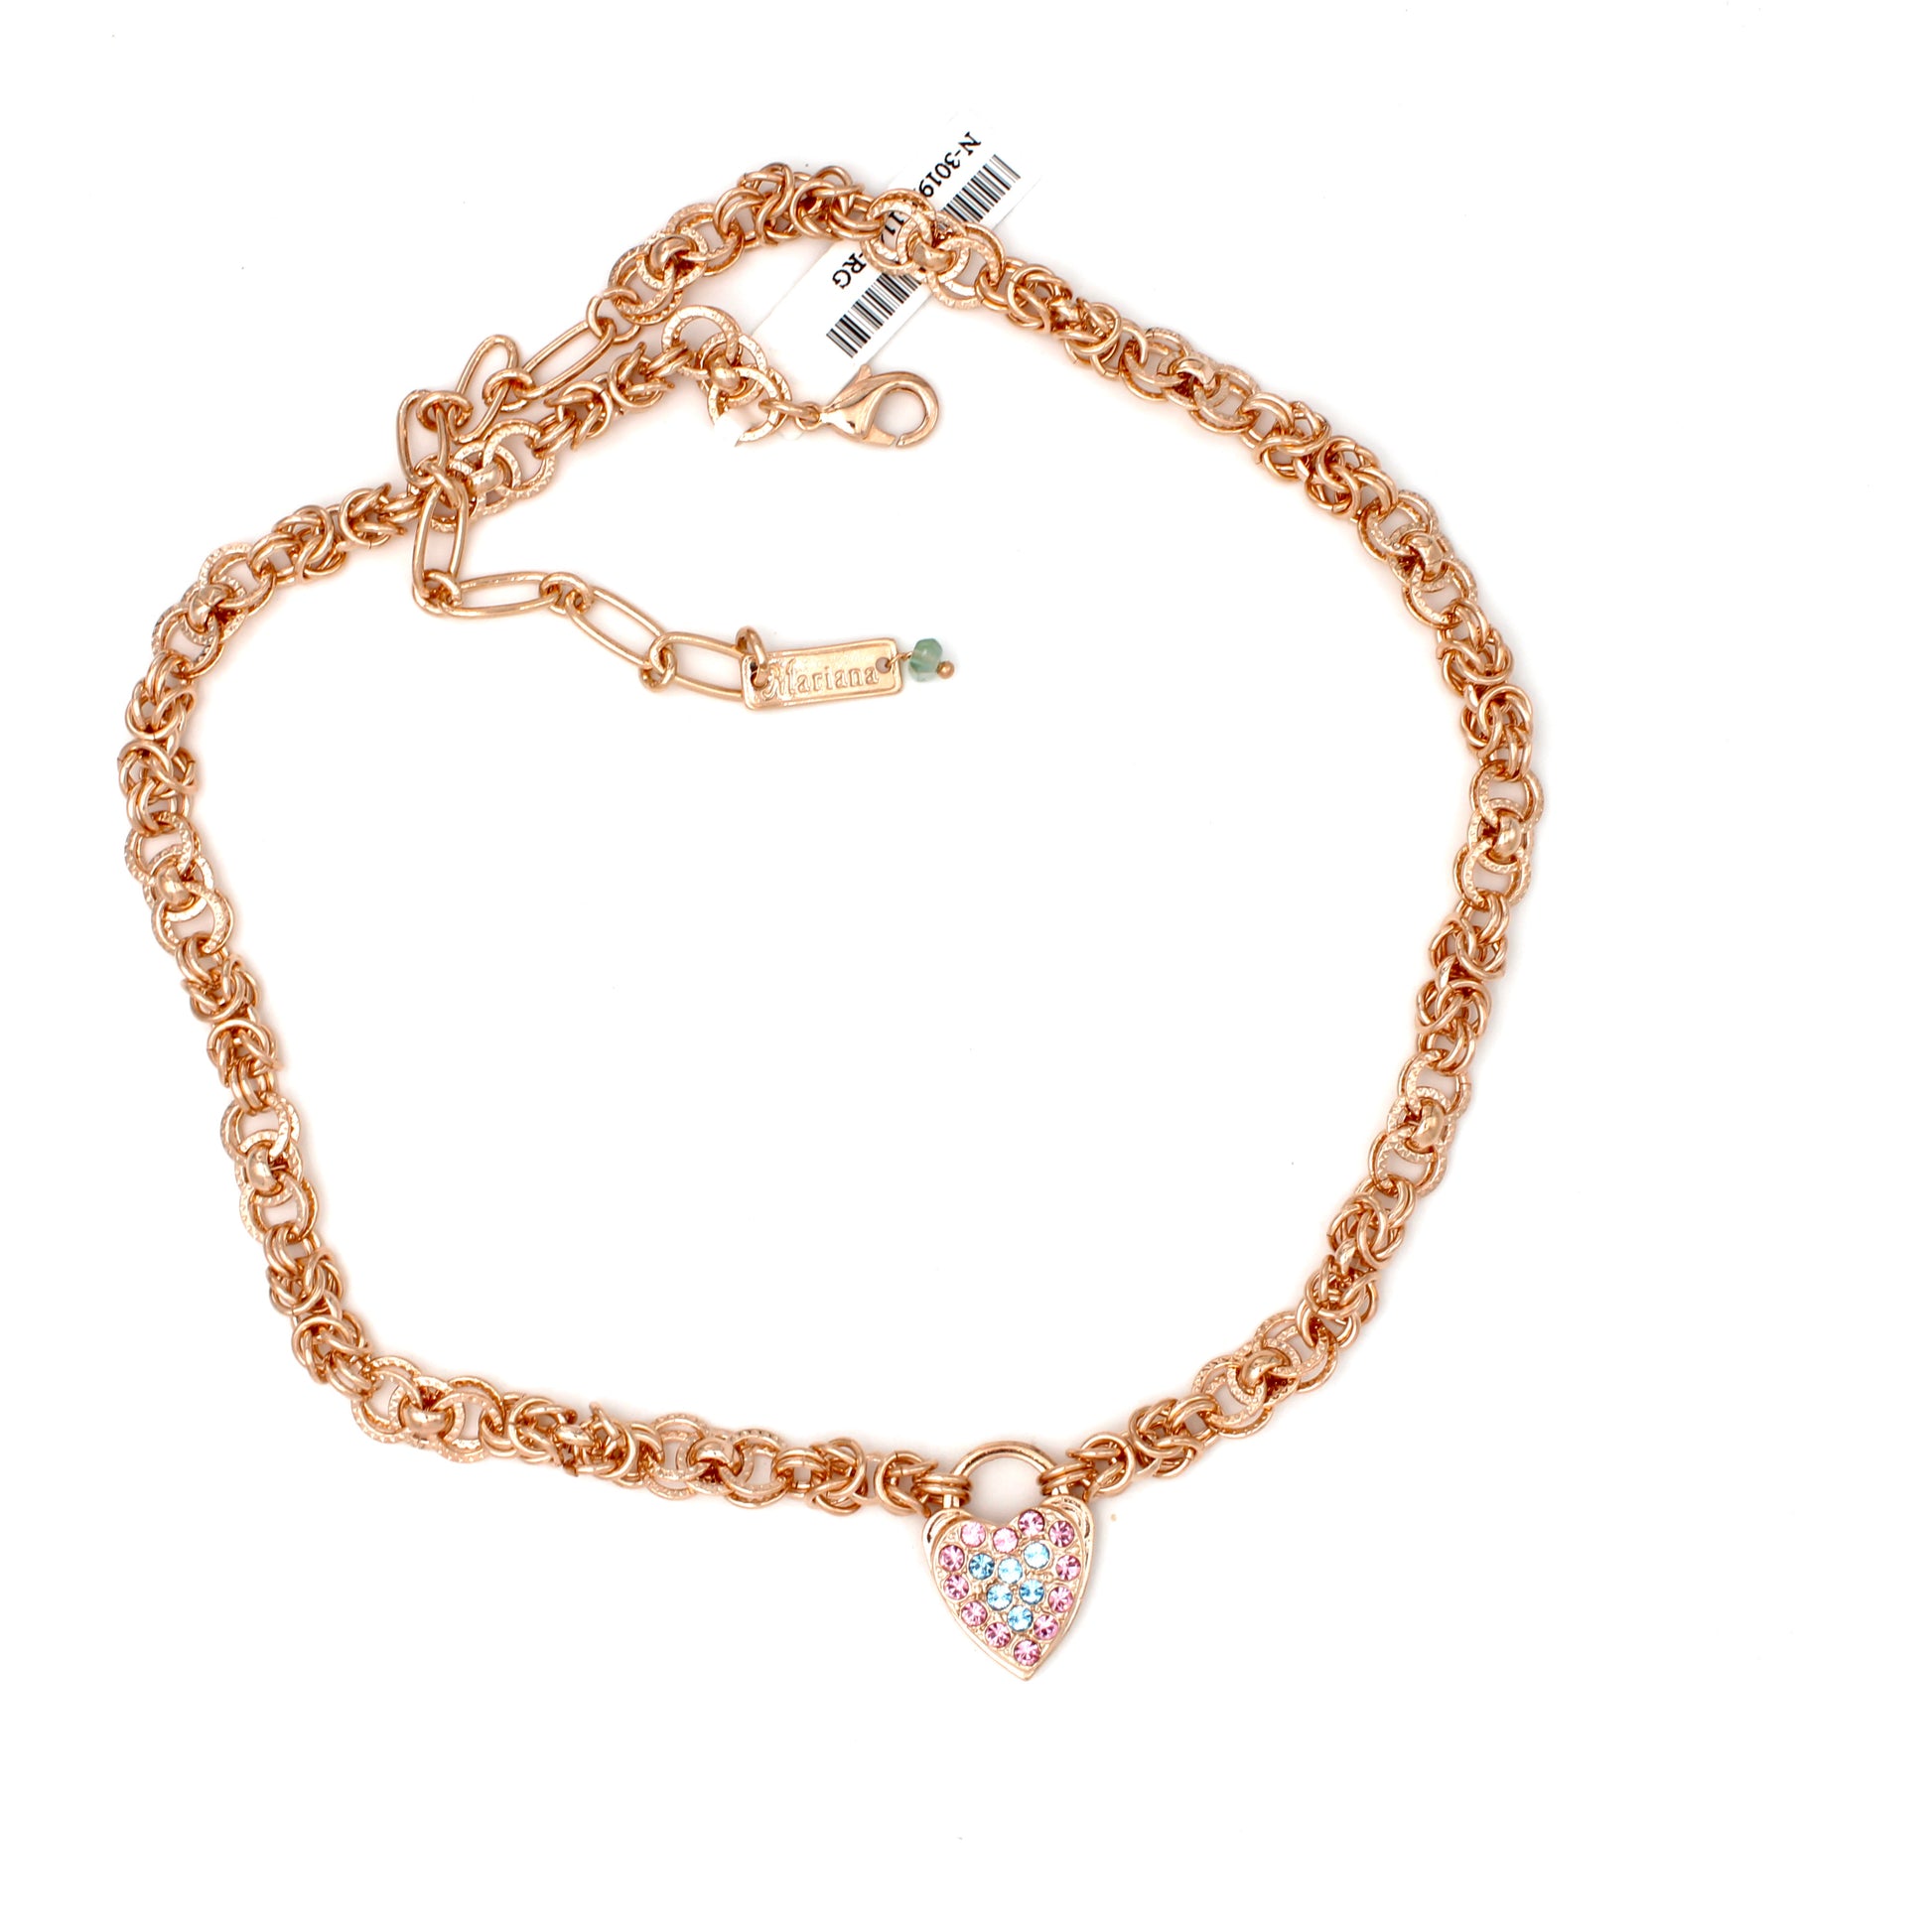 Funfetti Collection Double Link Chain Heart Necklace in Rose Gold - MaryTyke's